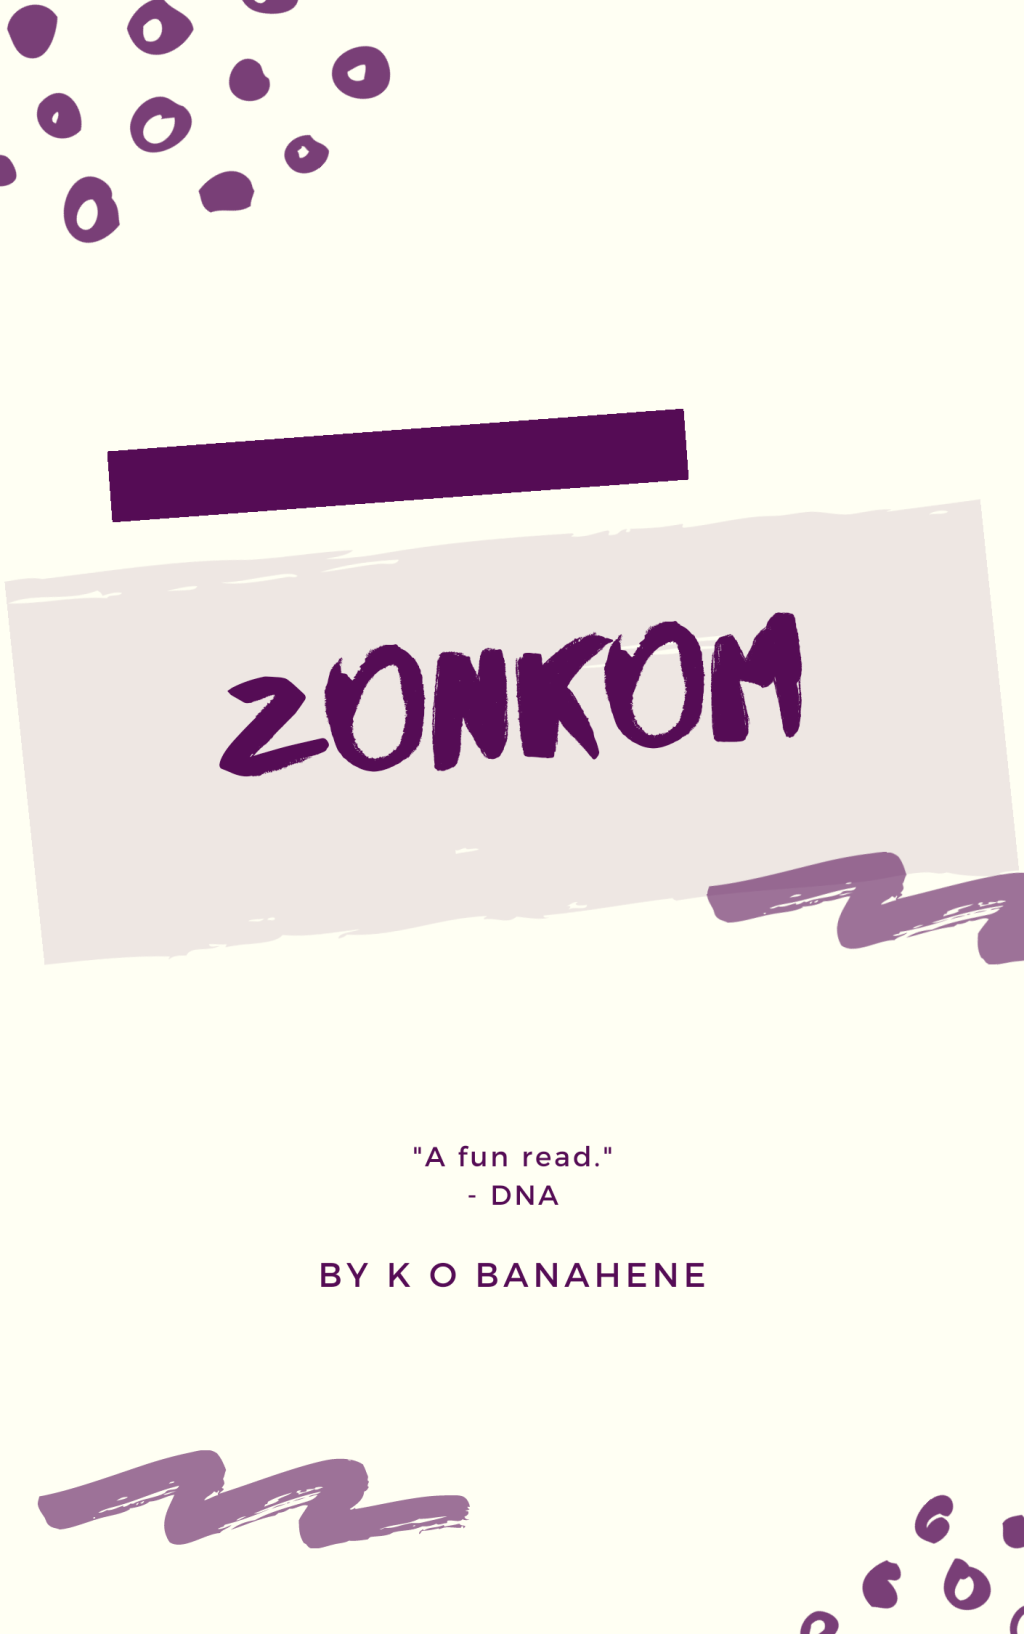 Coming Soon🔥🔥#Zonkom #Africanread #Ghanaiancontemporary #Christmasspecial